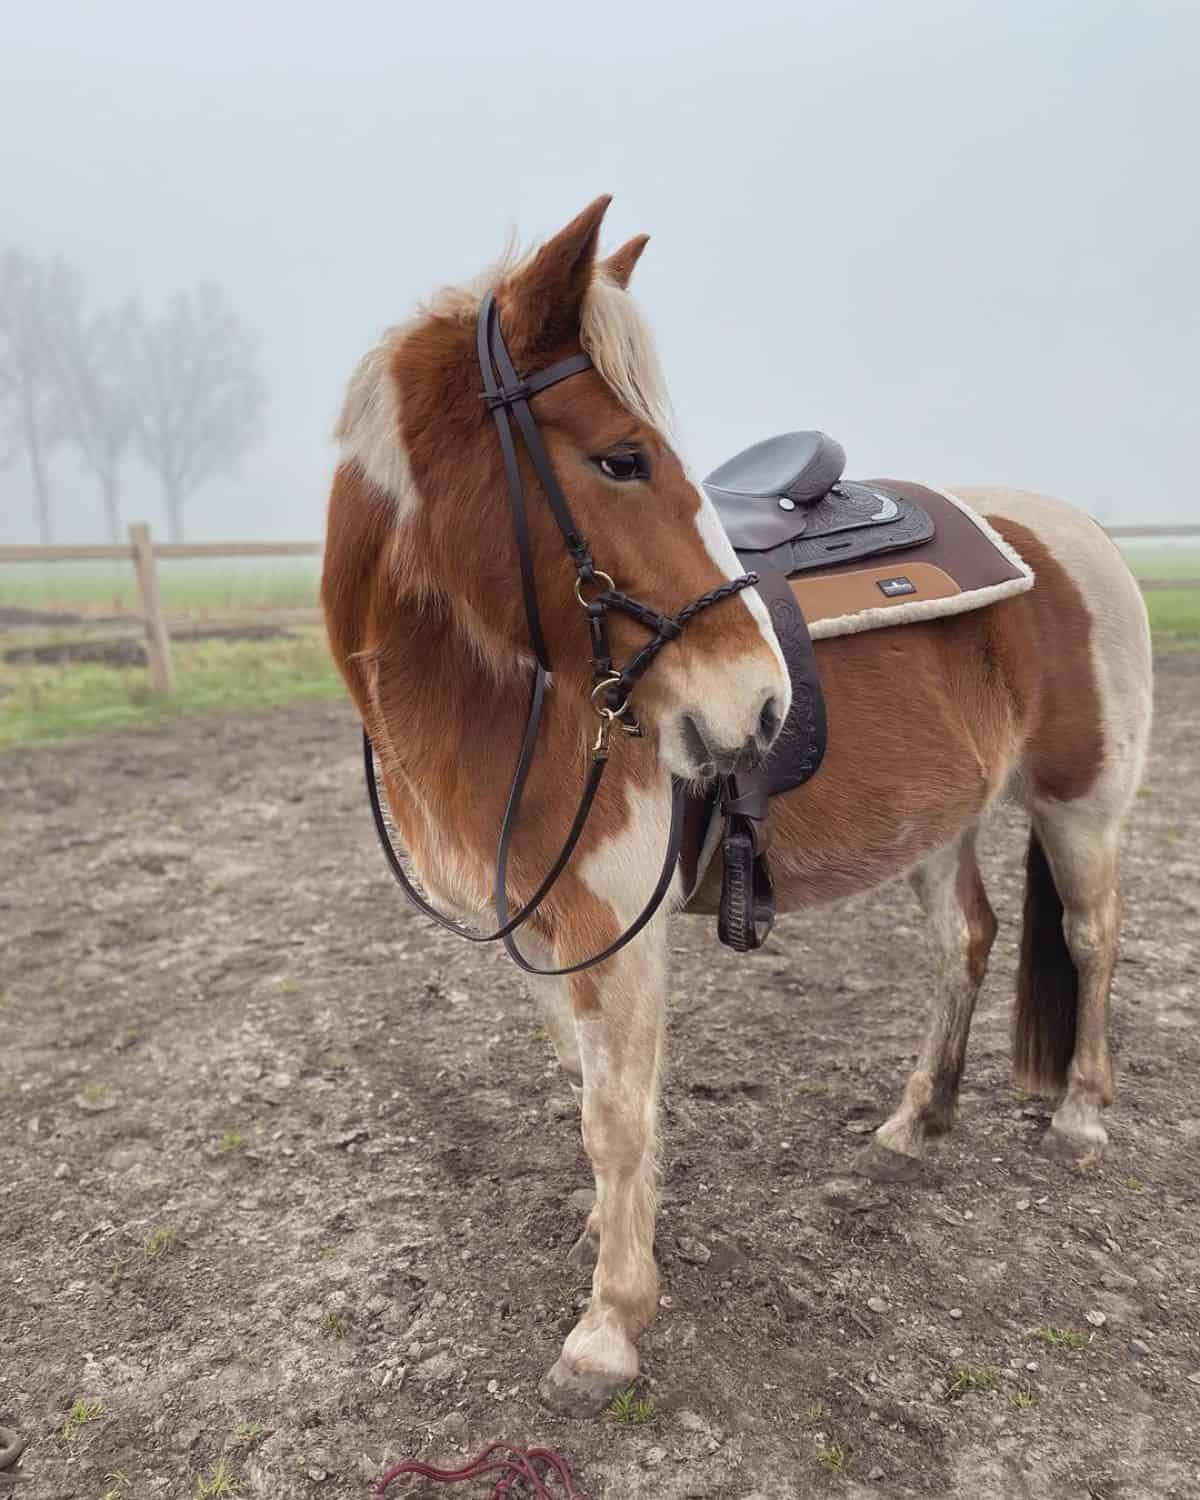 An adorable young brown horse with a leather saddle on a paddock.